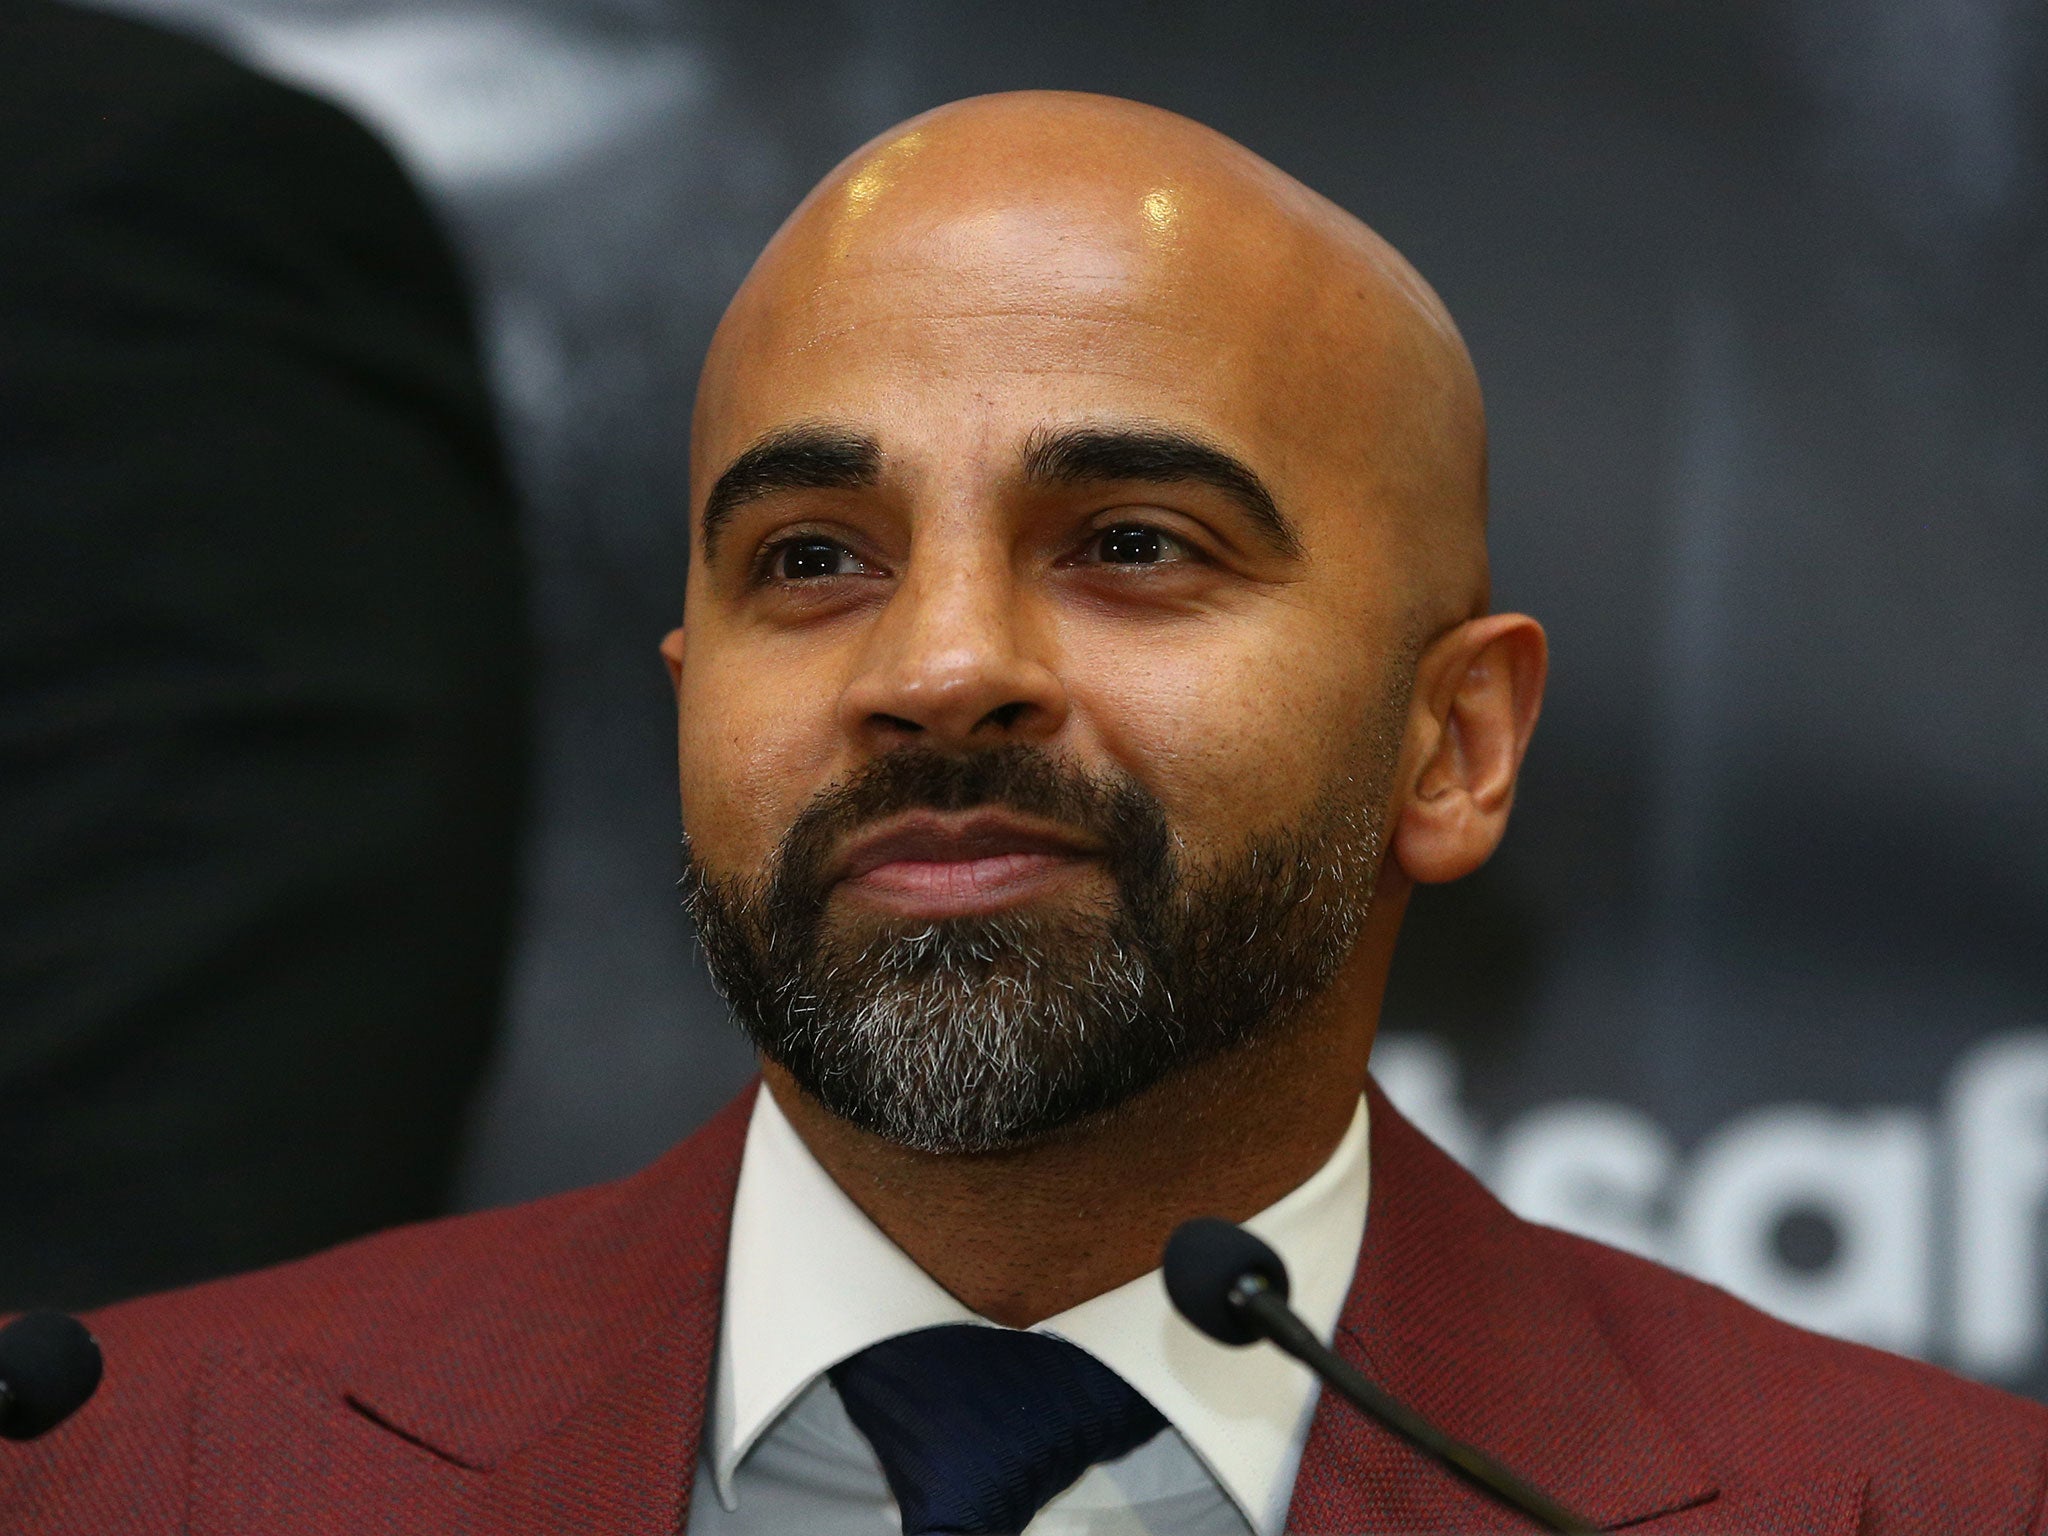 Dave Coldwell has trained Tony Bellew knowing the ins and outs of how David Haye works